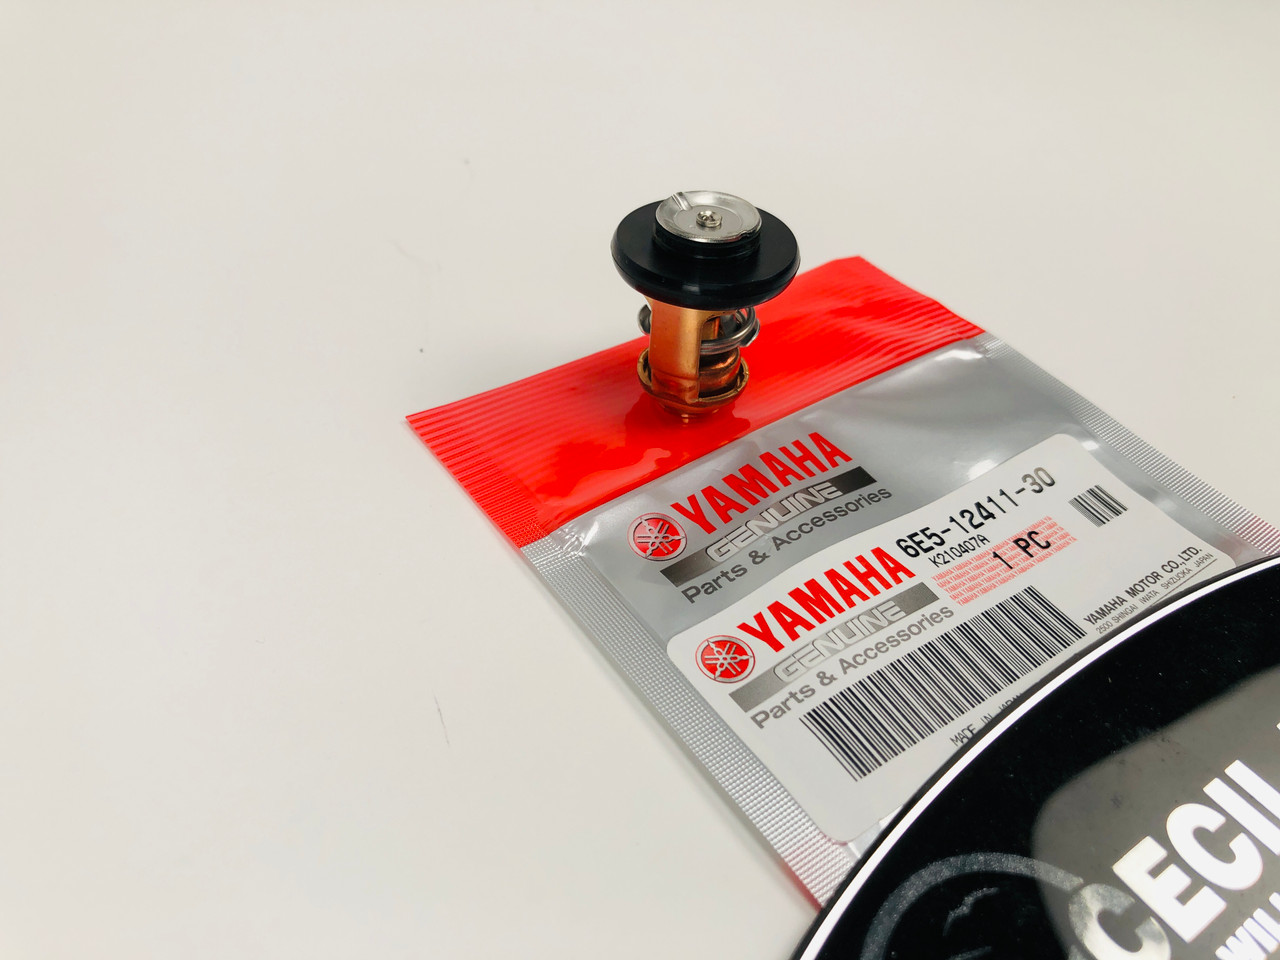 $27.95* GENUINE YAMAHA no tax* THERMOSTAT *In Stock & Ready To Ship!